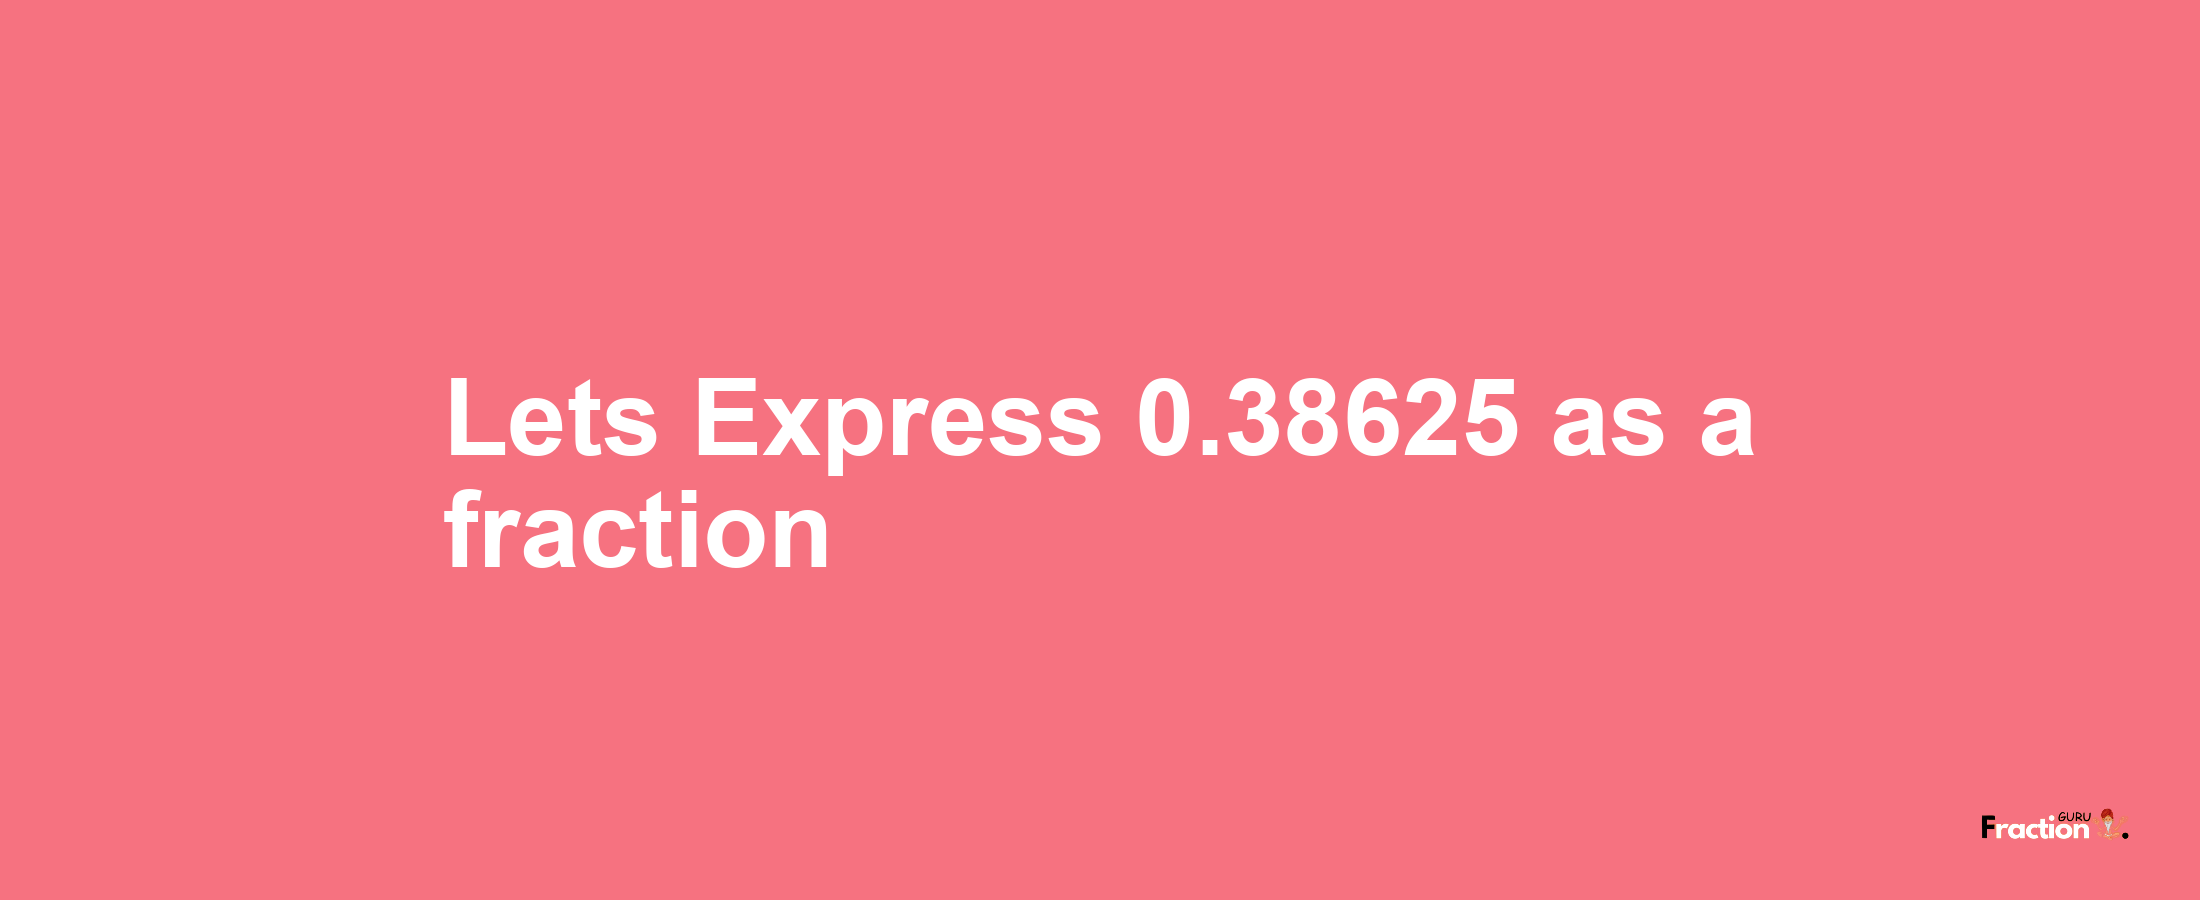 Lets Express 0.38625 as afraction